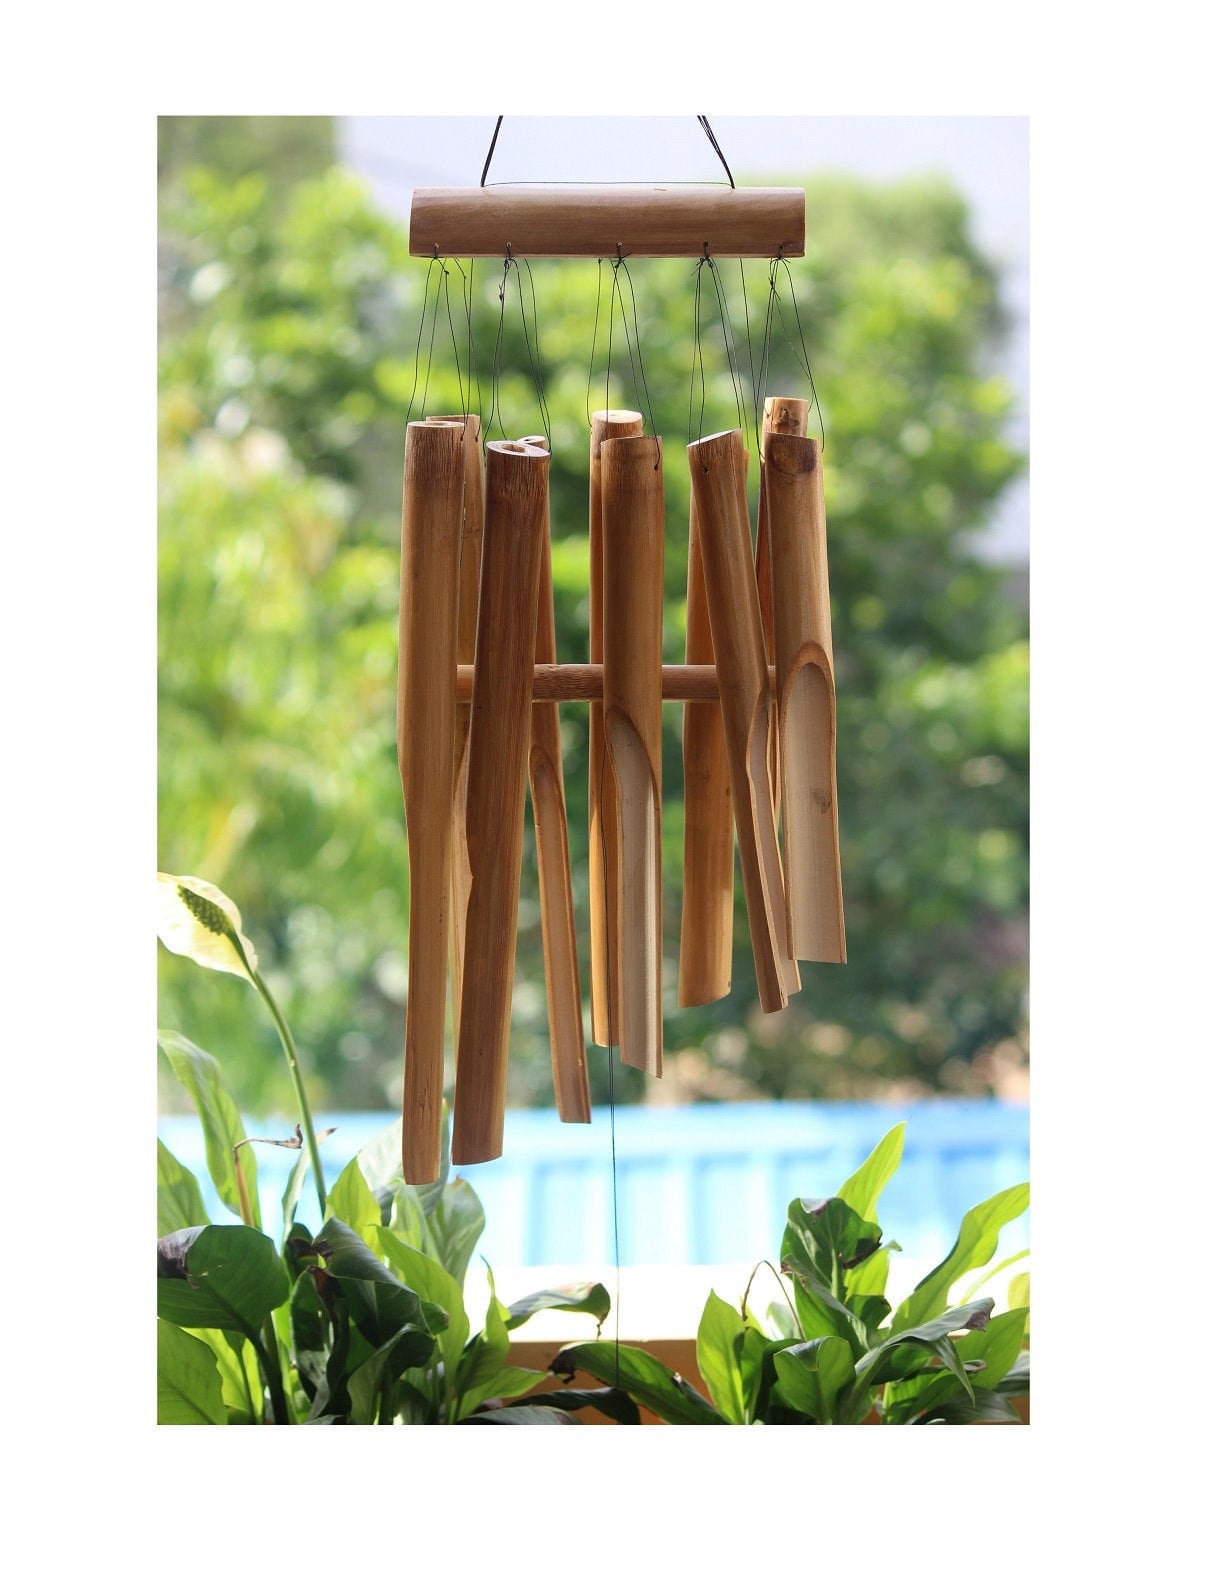 Bamboo Sticks 20 Pcs Pack Natural Craft Material Wood Wooden Reed Twigs  Wind Chimes Diy Cane Plant Branches Raw Supplies Tiki Decor Parts 